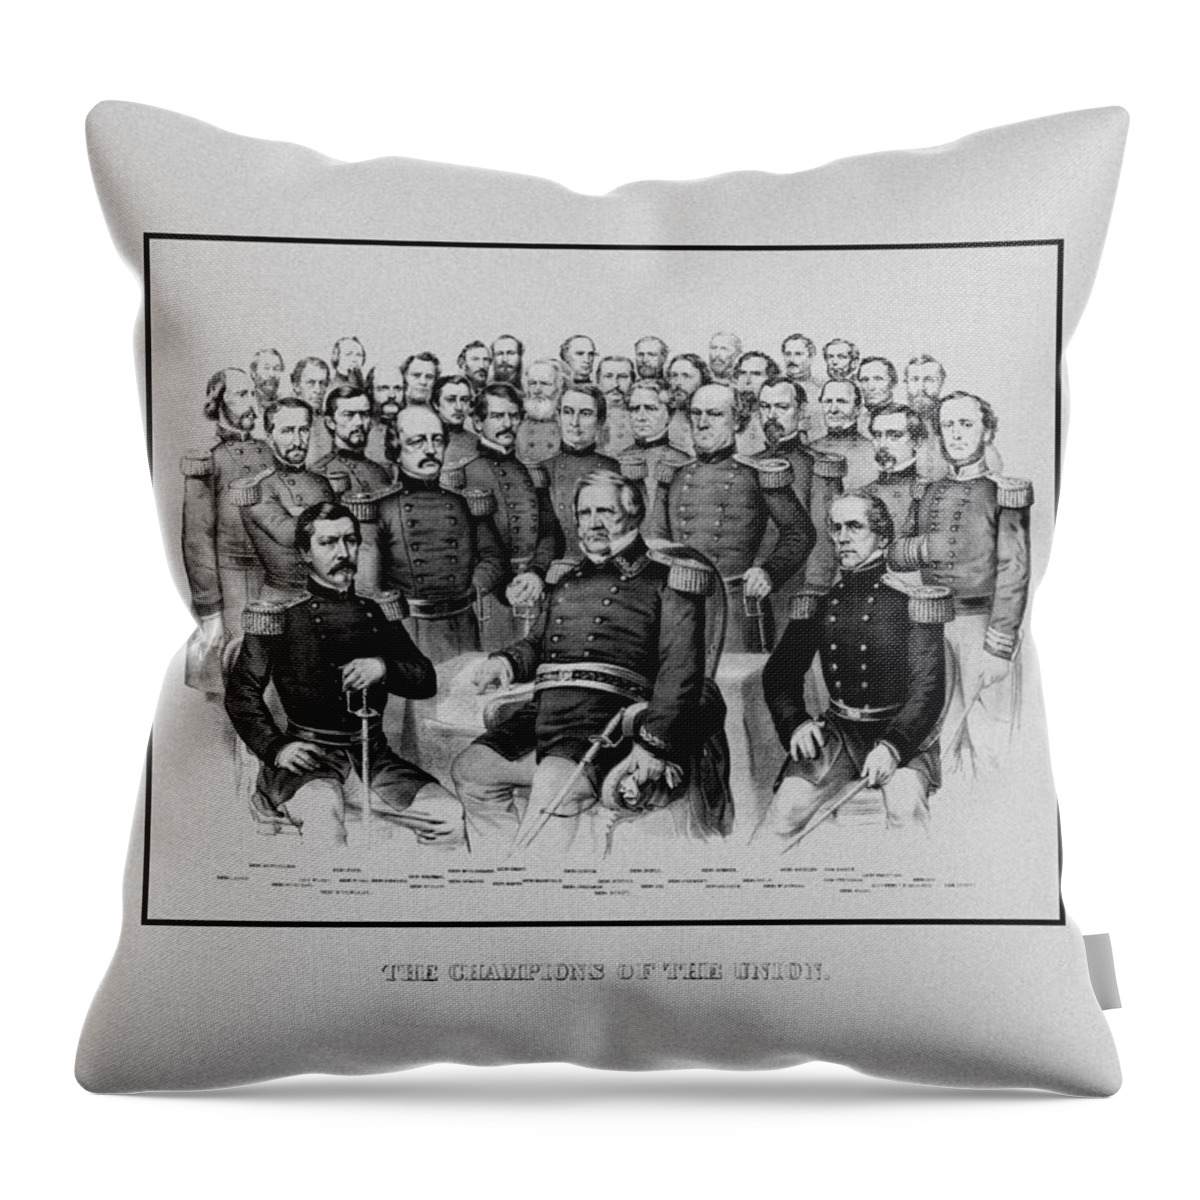 Civil War Throw Pillow featuring the mixed media The Champions Of The Union -- Civil War by War Is Hell Store